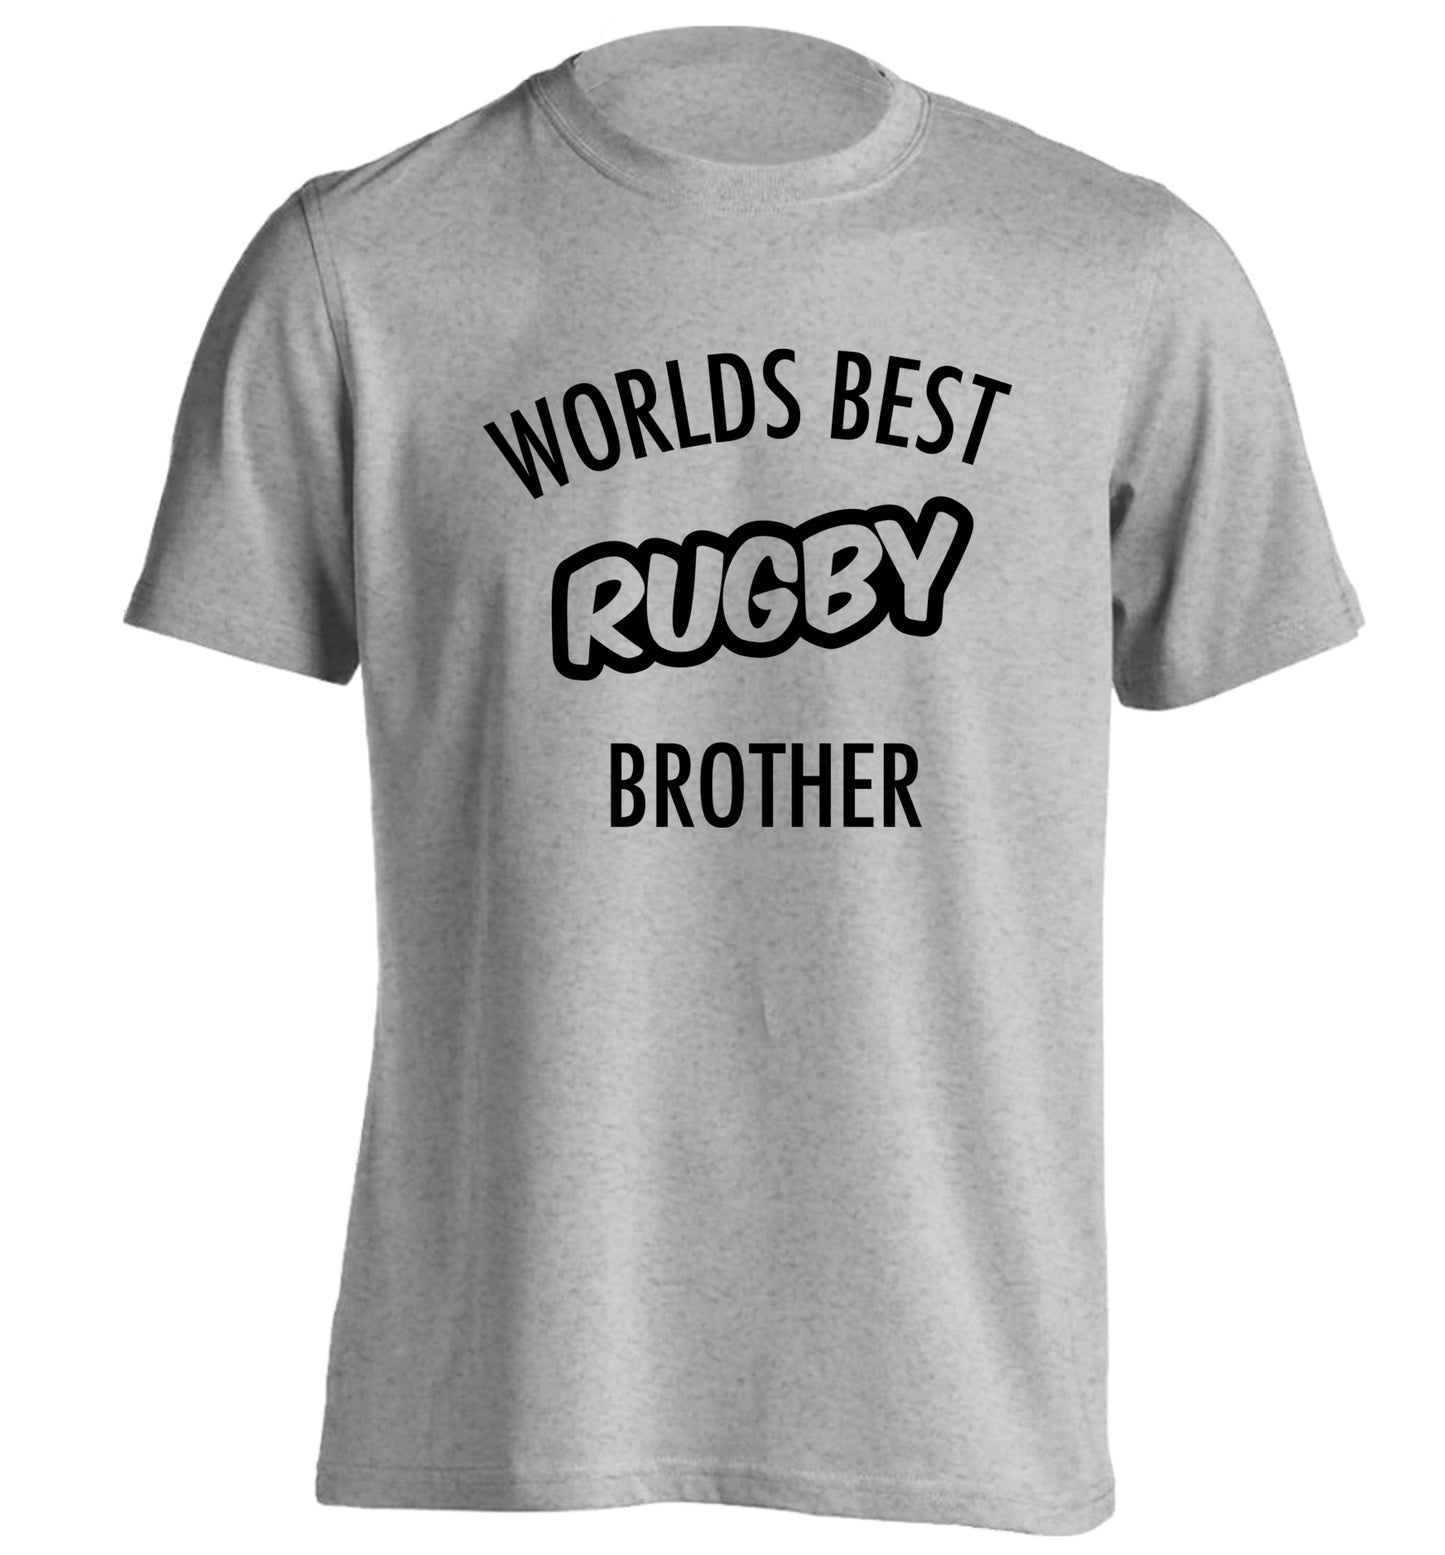 Worlds best rugby brother adults unisex grey Tshirt 2XL